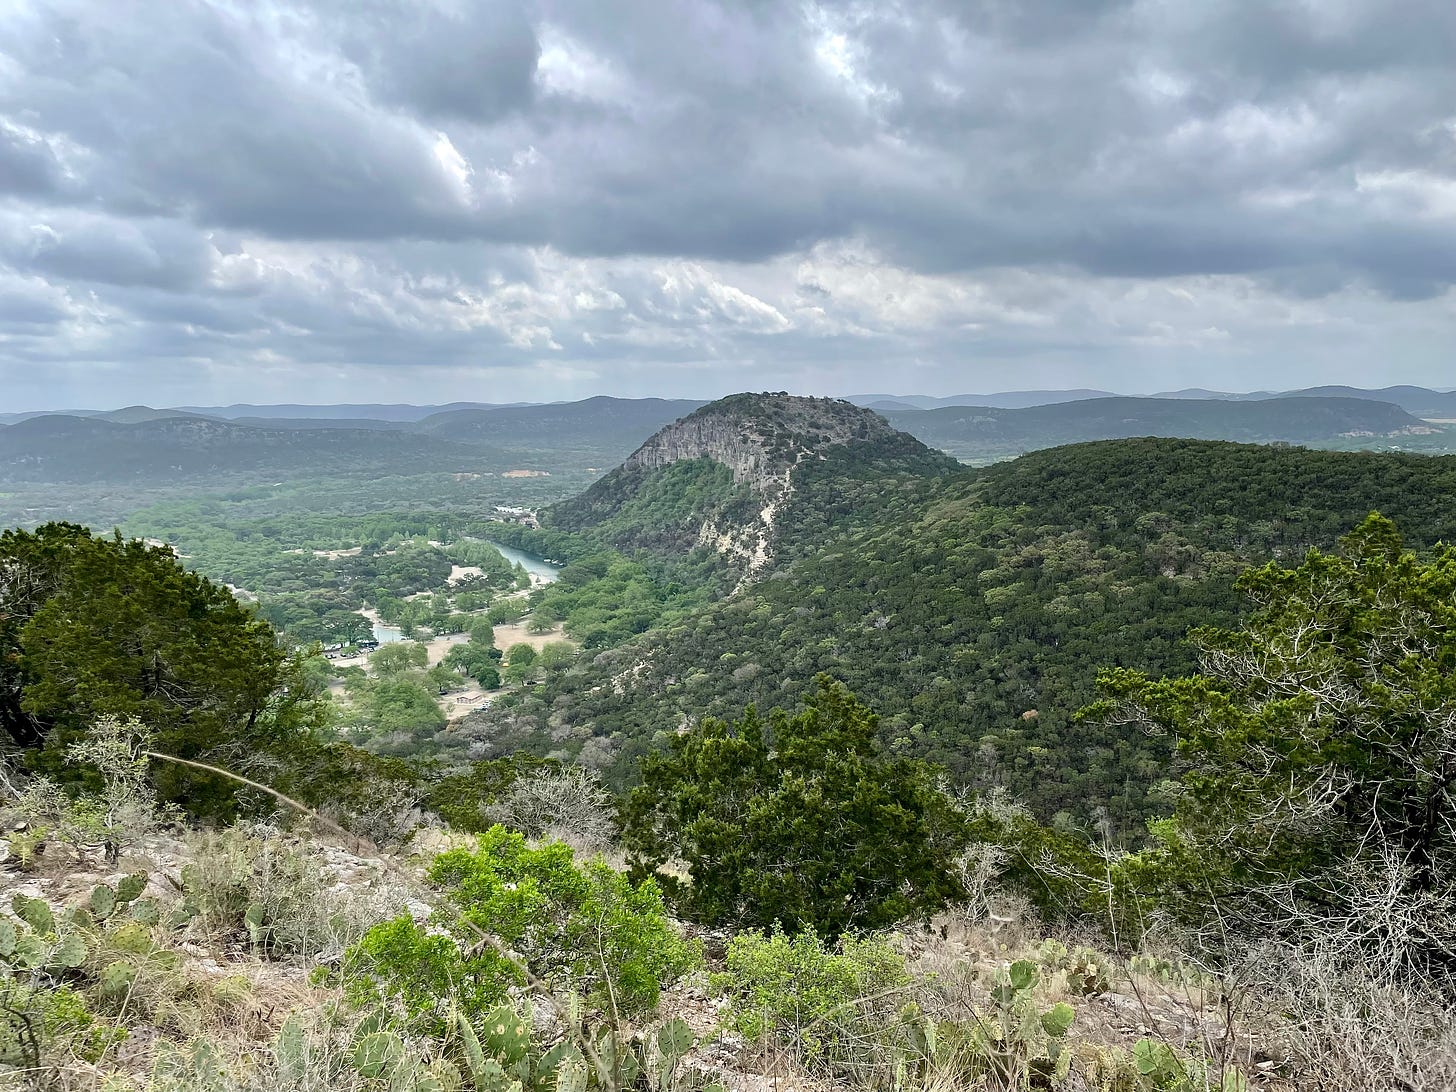 A photo of Old Baldy in Garner State Park with a backdrop of big gray clouds